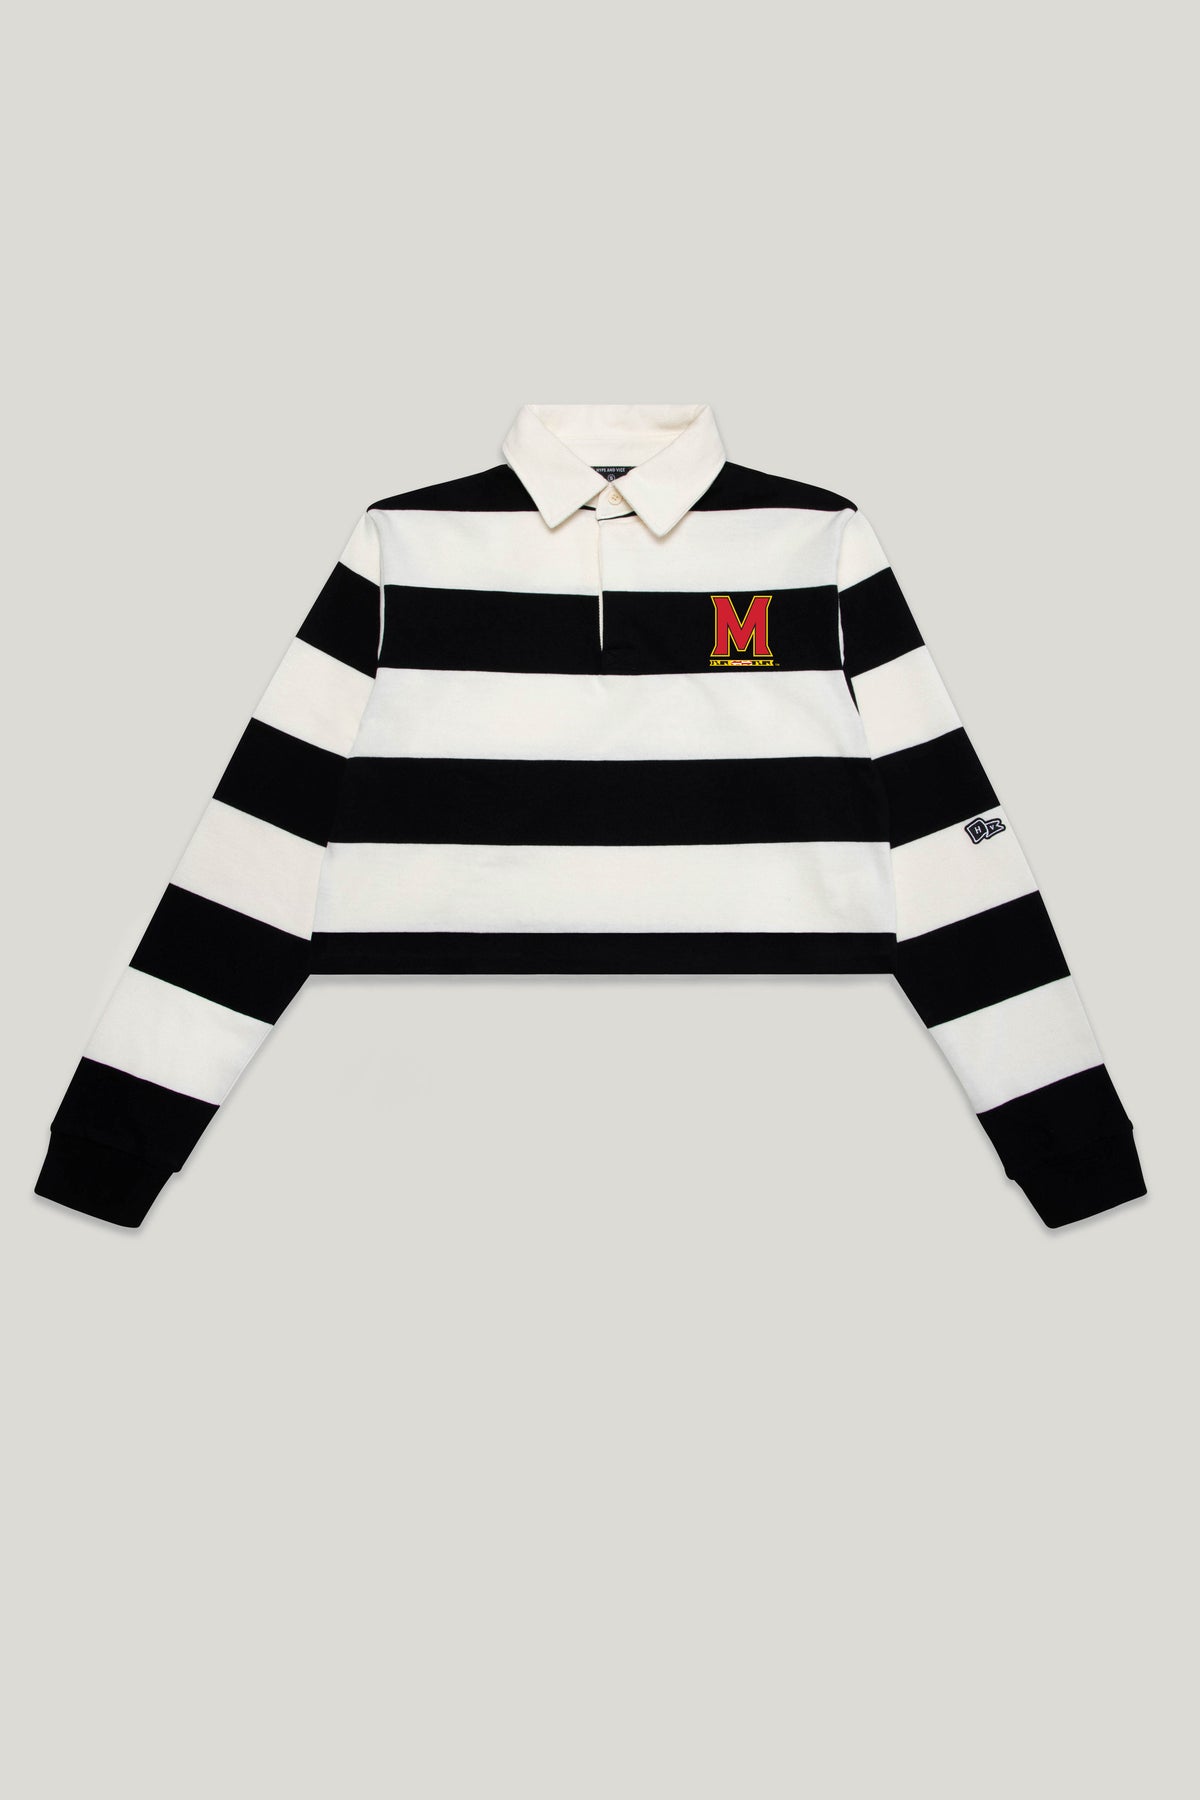 Maryland Rugby Top